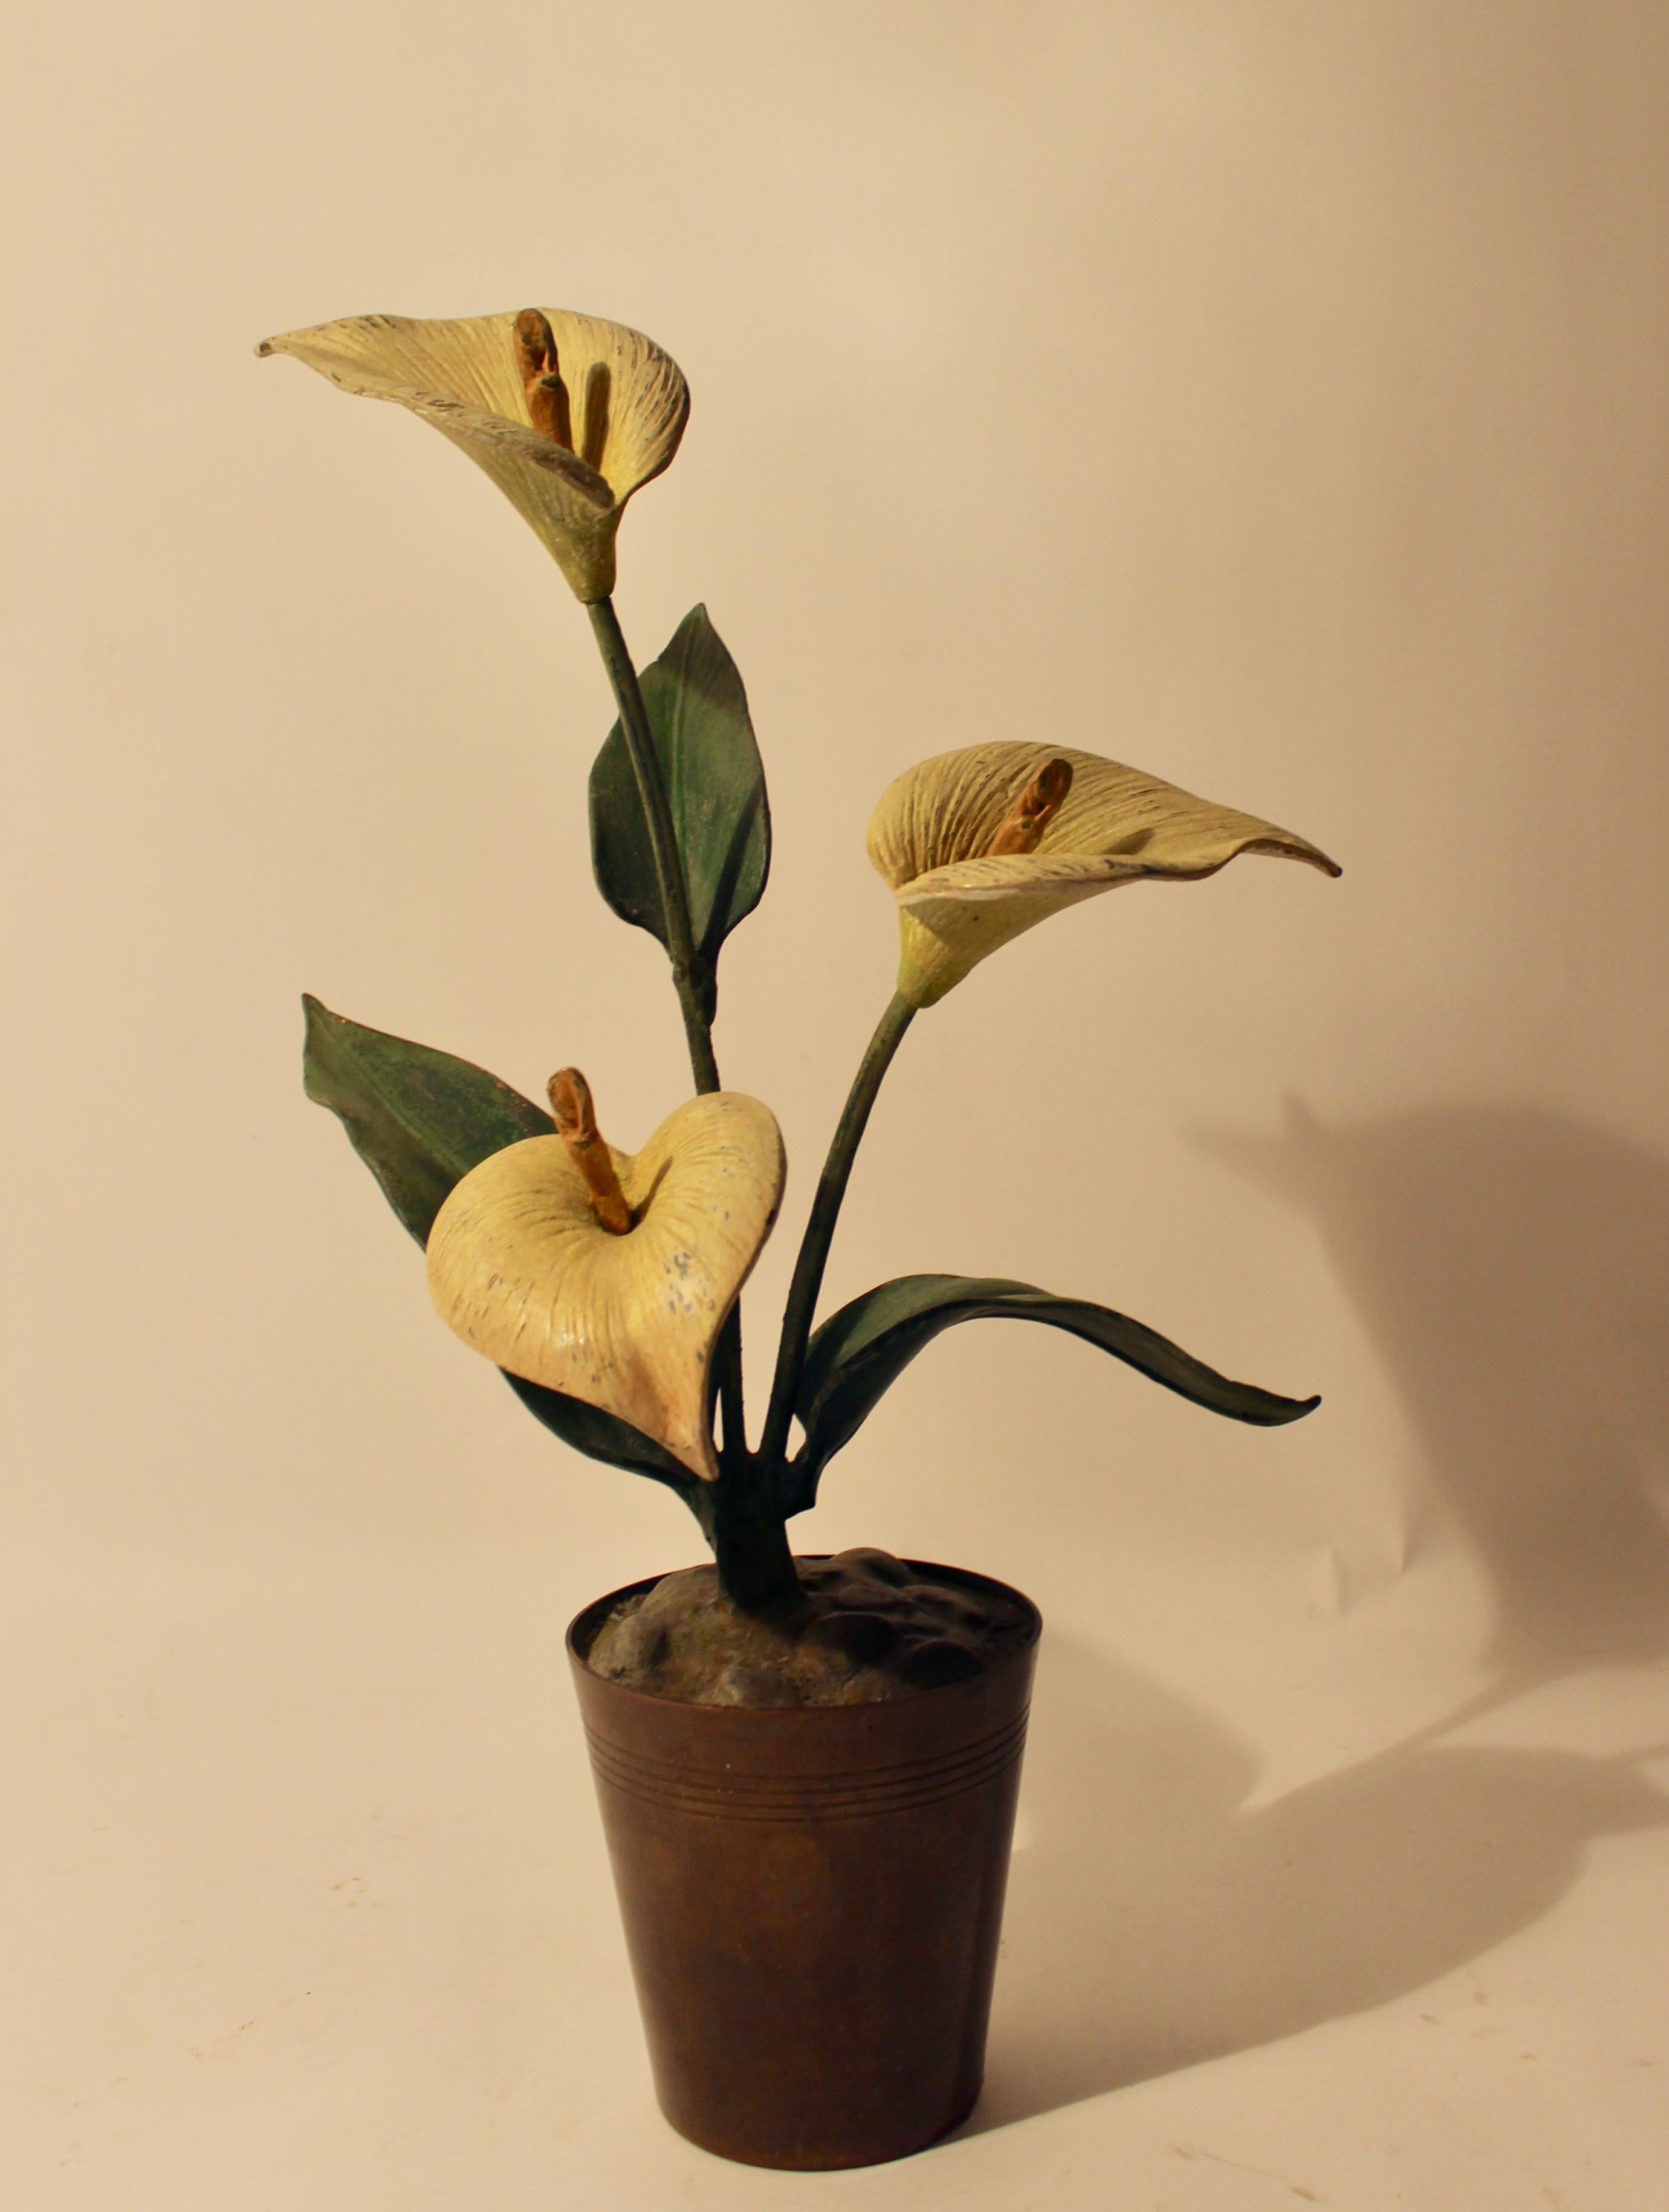 A charming poly-chrome Vienna bronze sculpture in the form of a potted Arum lily, circa 1900. Realistic in form with its white trumpet shaped flowers and yellow stamen and leaves all cold painted. The 